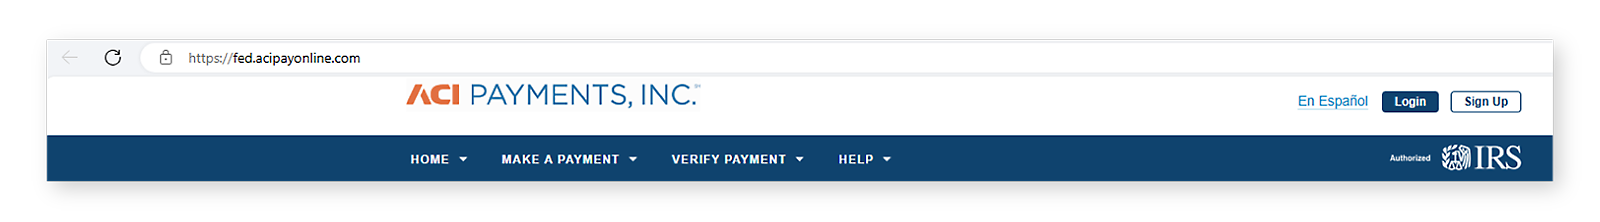 A screen shot of a web page using an Authorized IRS header image taken from an actual website for ACI Payments, Inc 